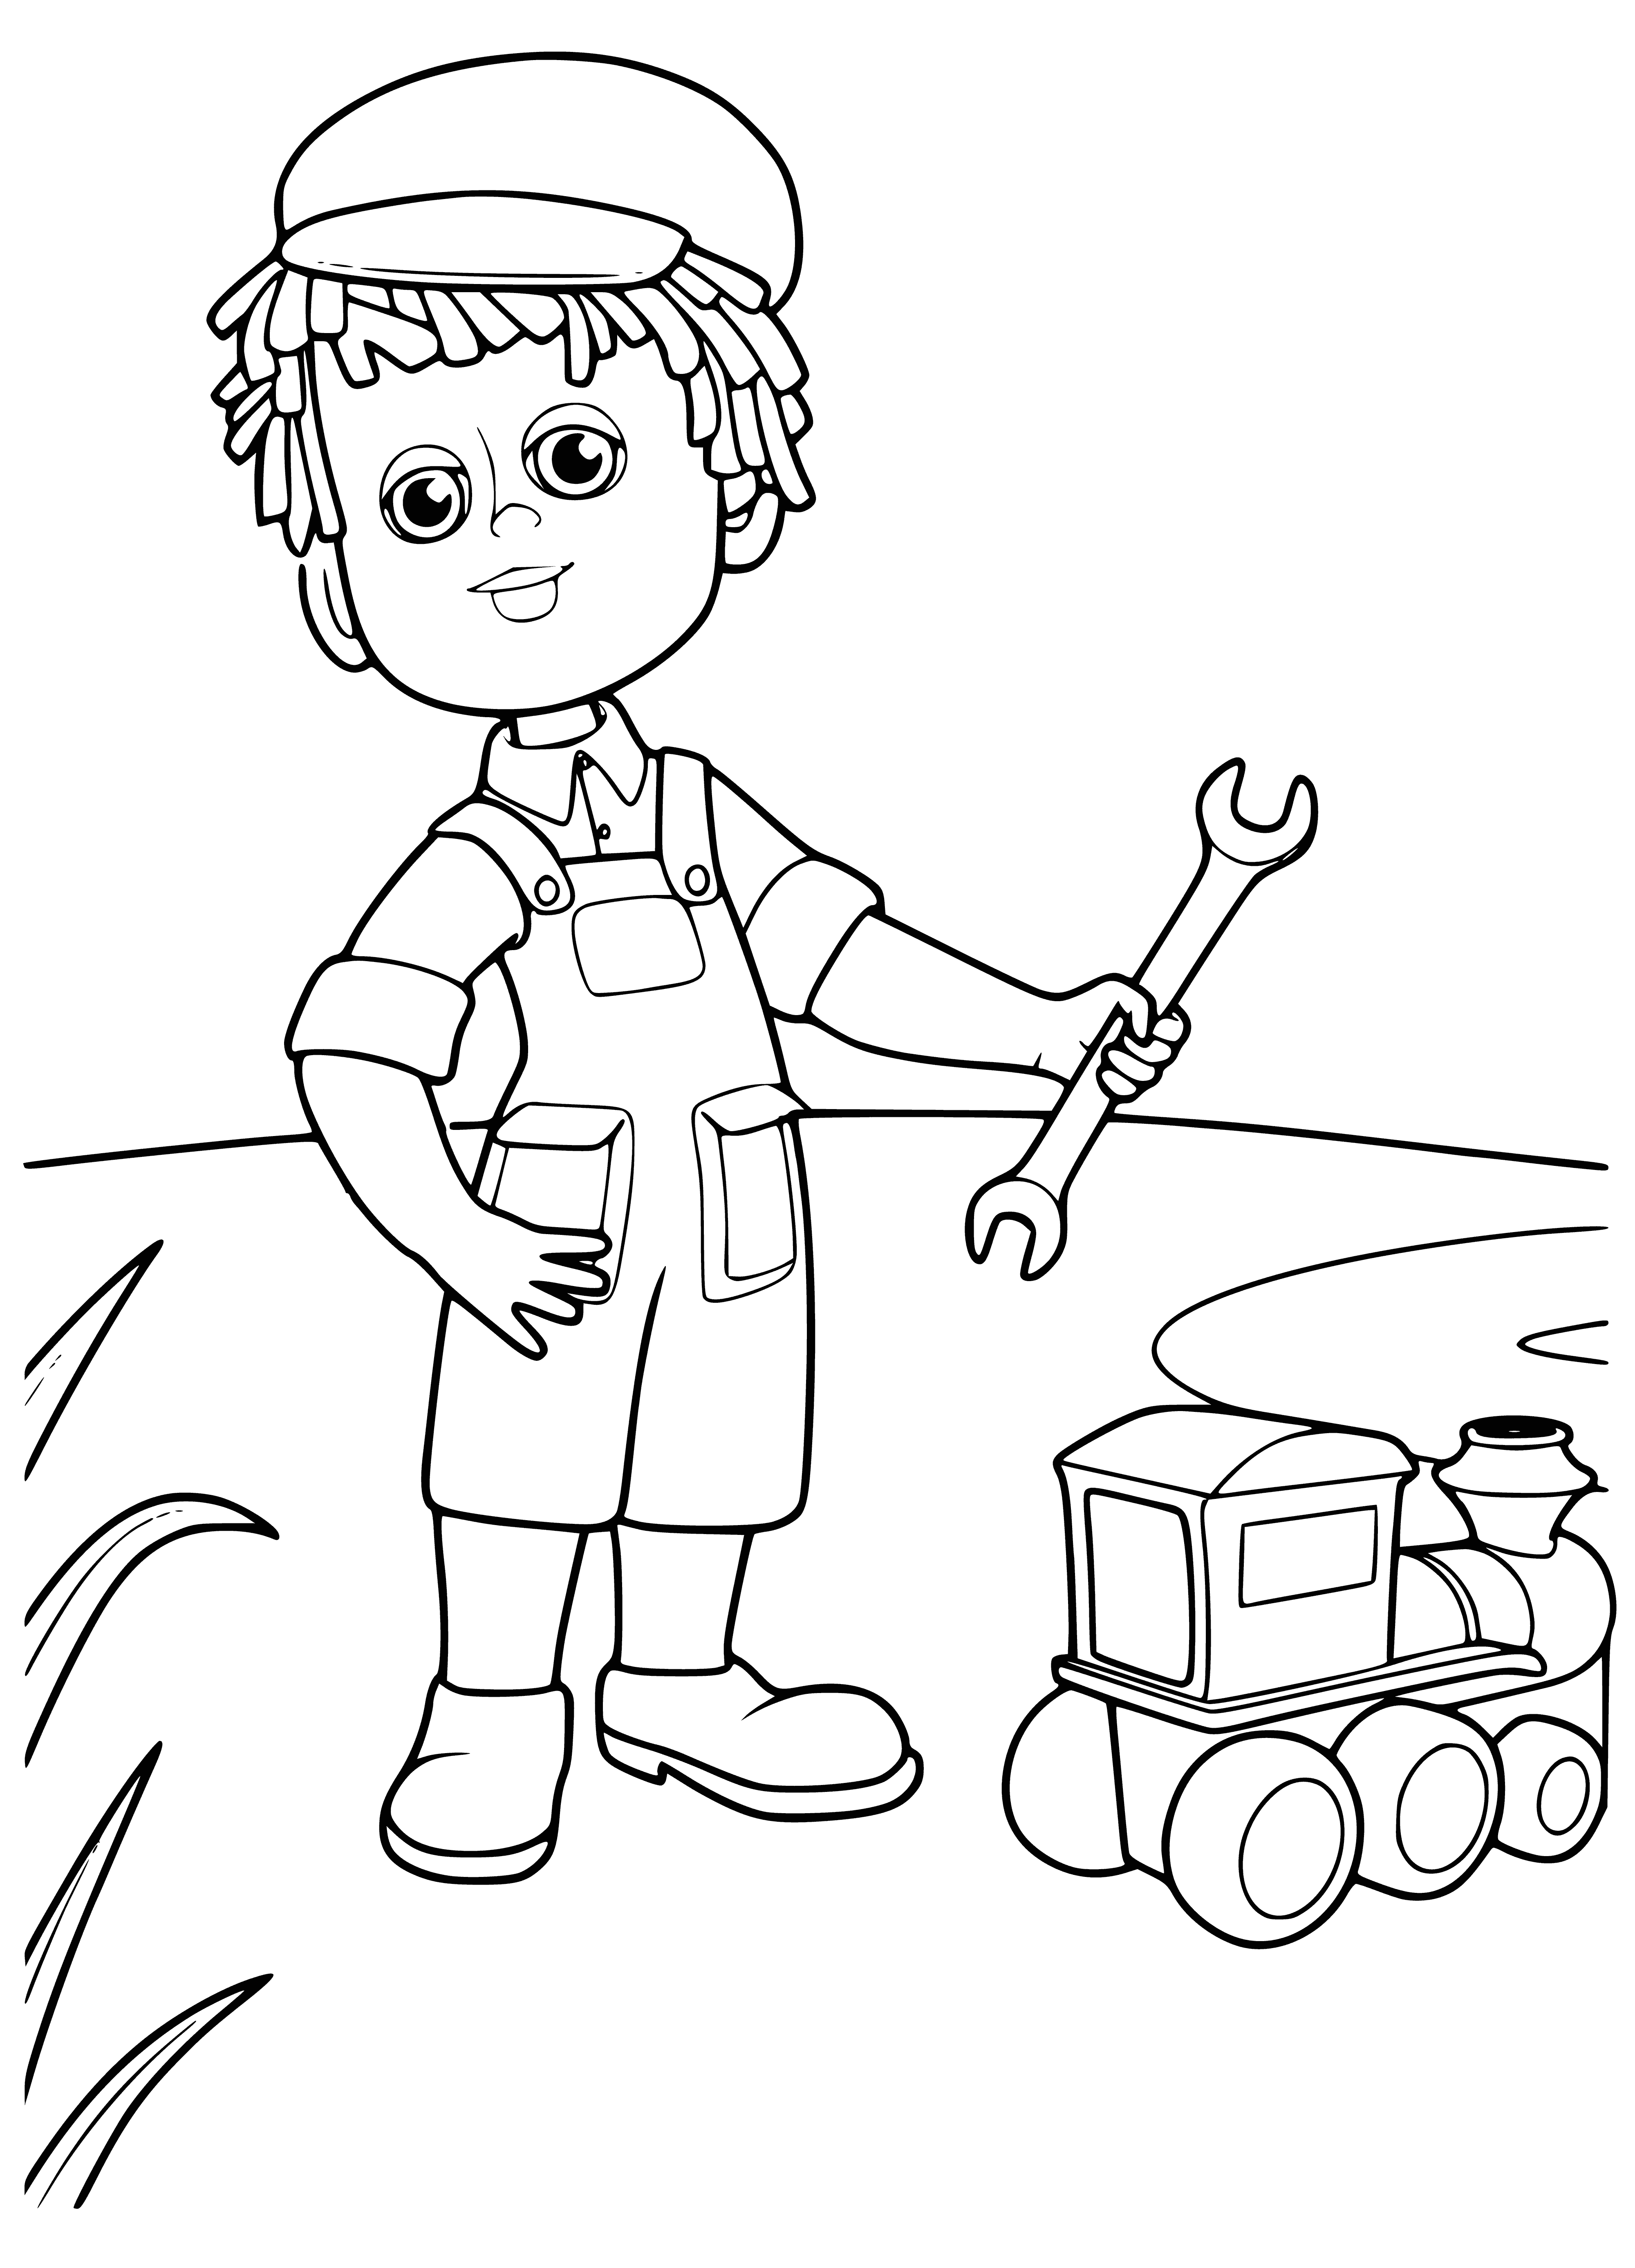 coloring page: Cartoon character Dunno stands next to robot Mechanic Cog, holding screwdriver & wrench, perplexed expression.